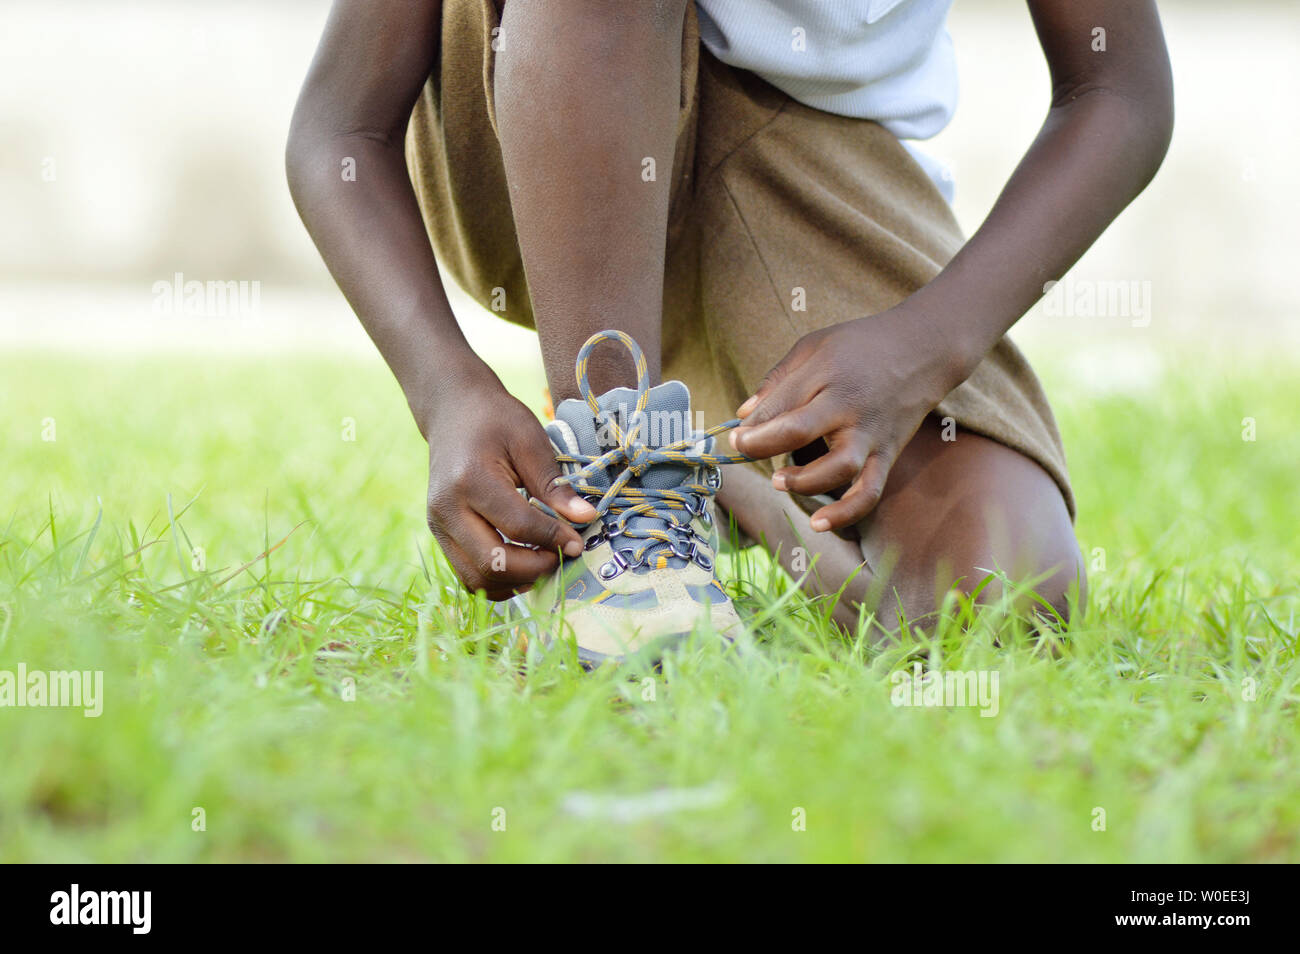 A child knee, tie his shoes lances to run better. Stock Photo